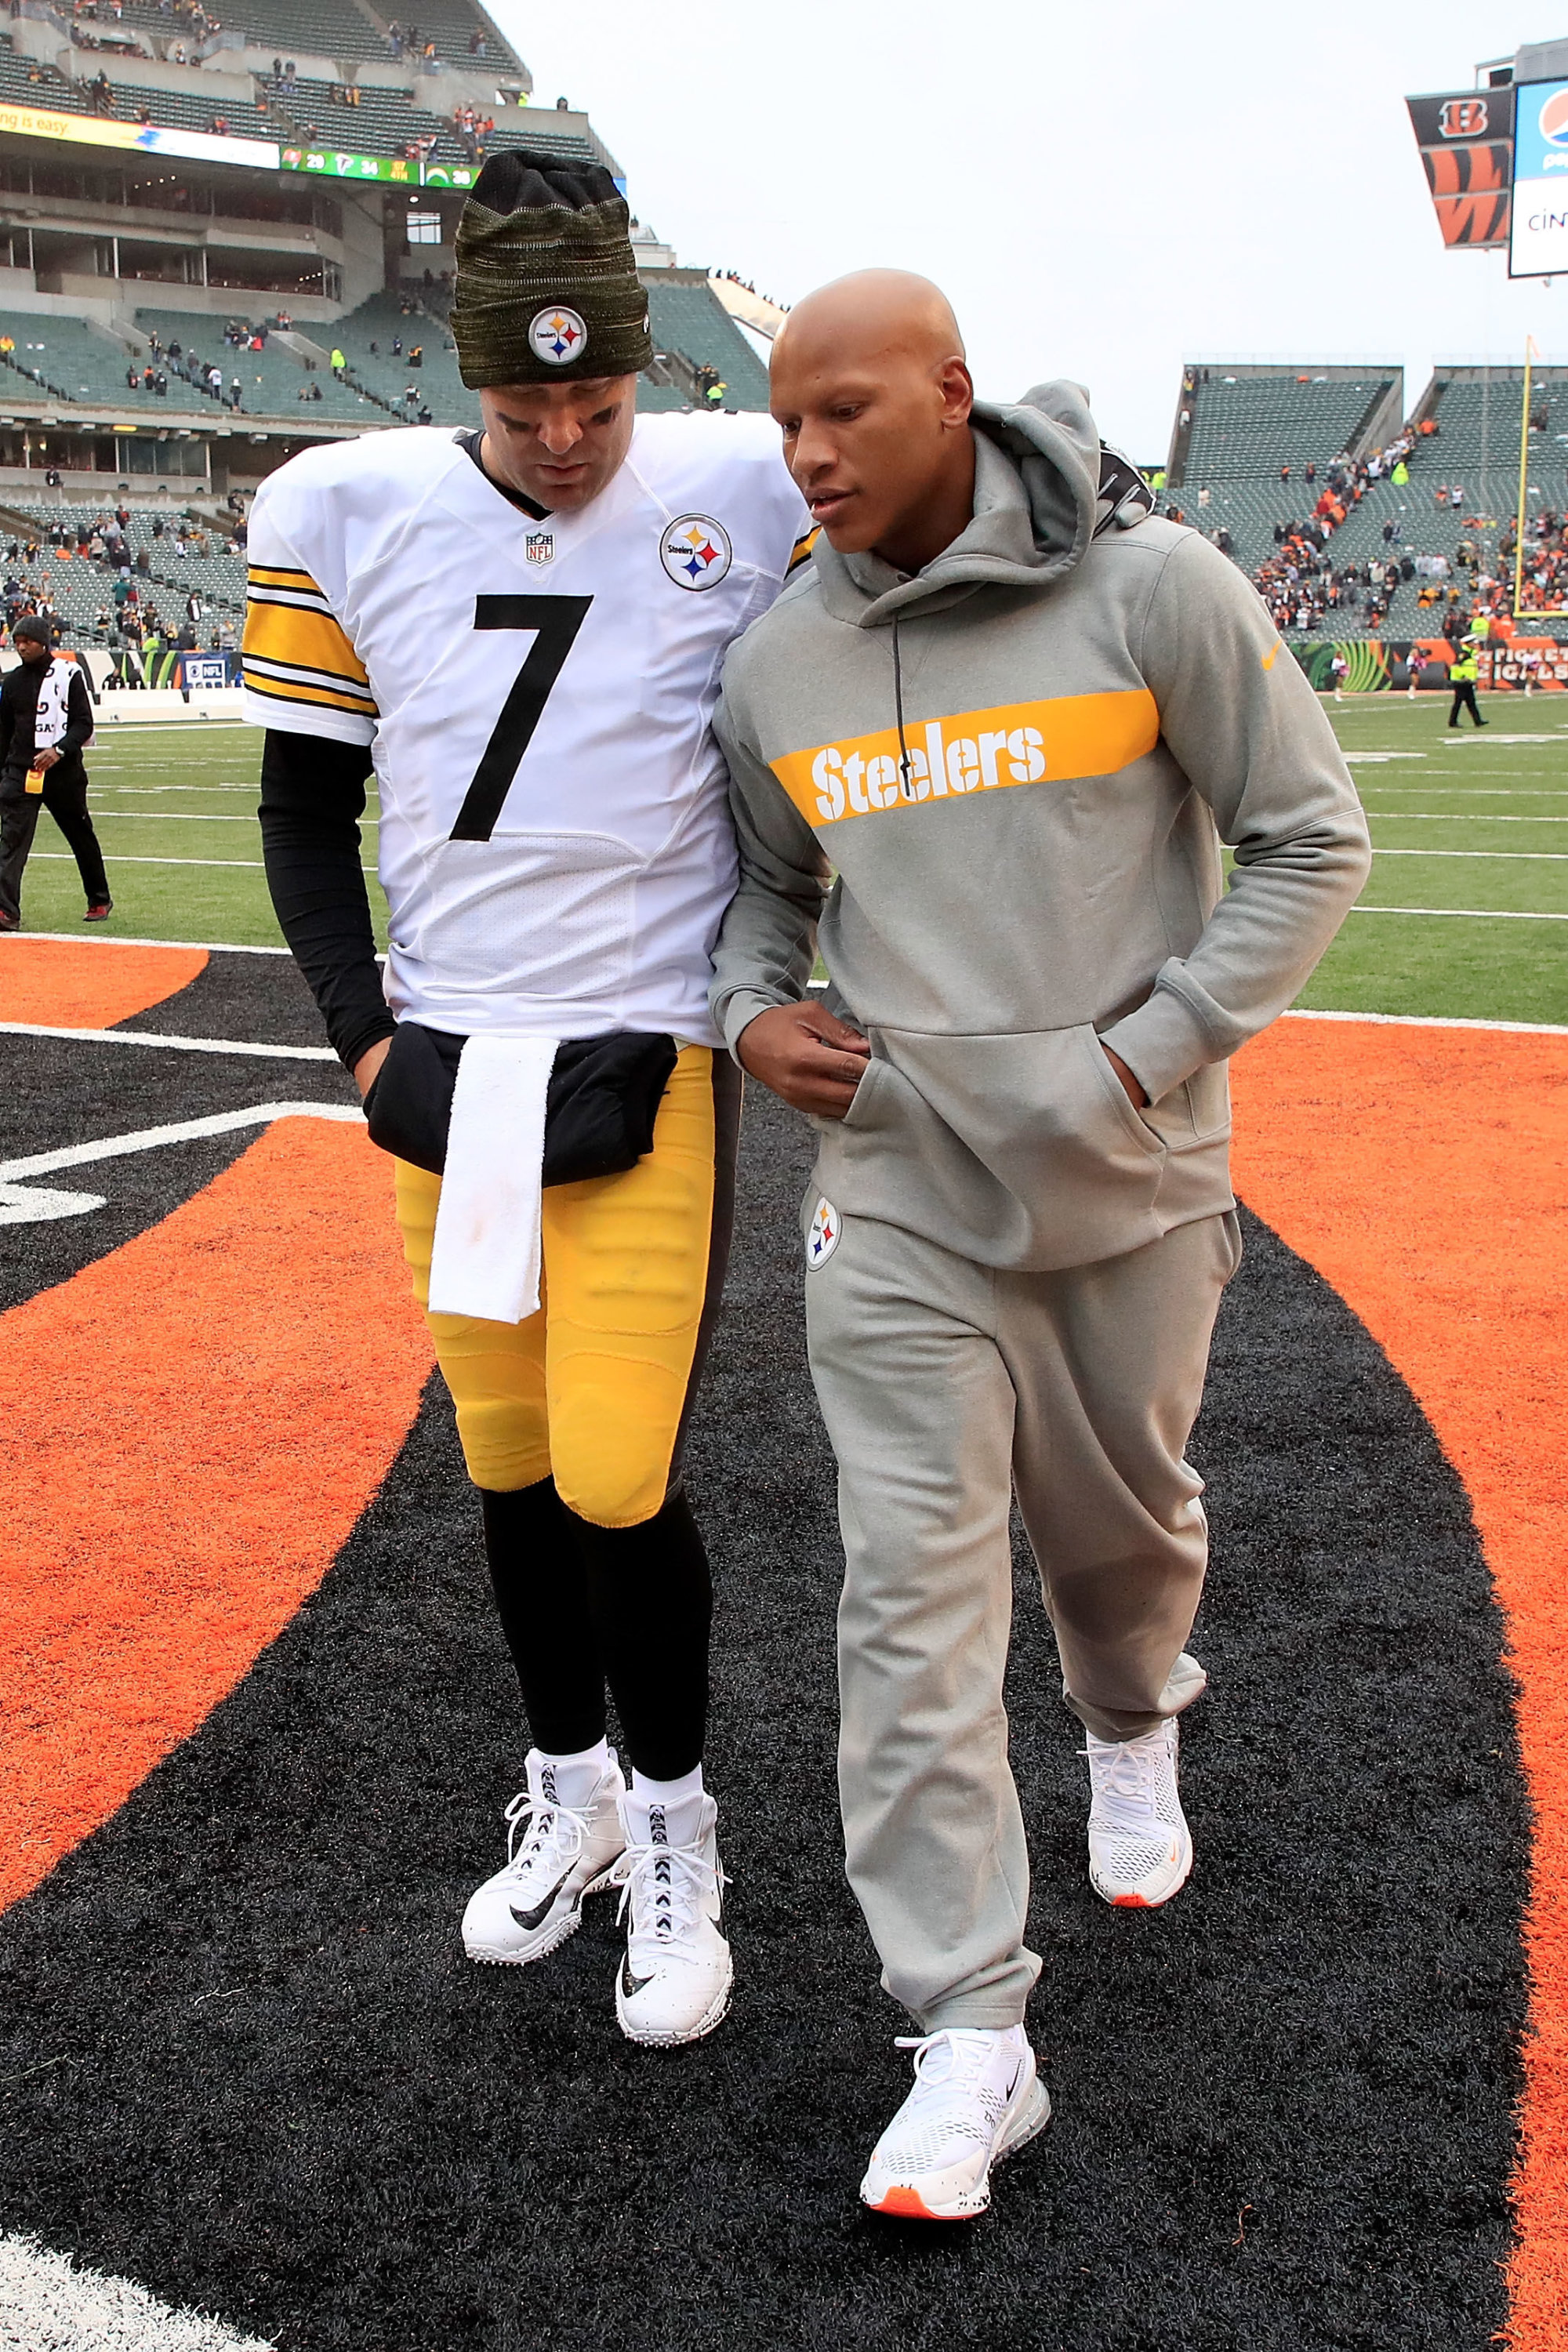 CINCINNATI, OH - OCTOBER 14:  Ben Roethlisberger #7 of the Pittsburgh Steelers and Ryan Shazier #50 walk off of the field after defeating the Cincinnati Bengals 28-21 at Paul Brown Stadium on October 14, 2018 in Cincinnati, Ohio. (Photo by Andy Lyons/Getty Images)